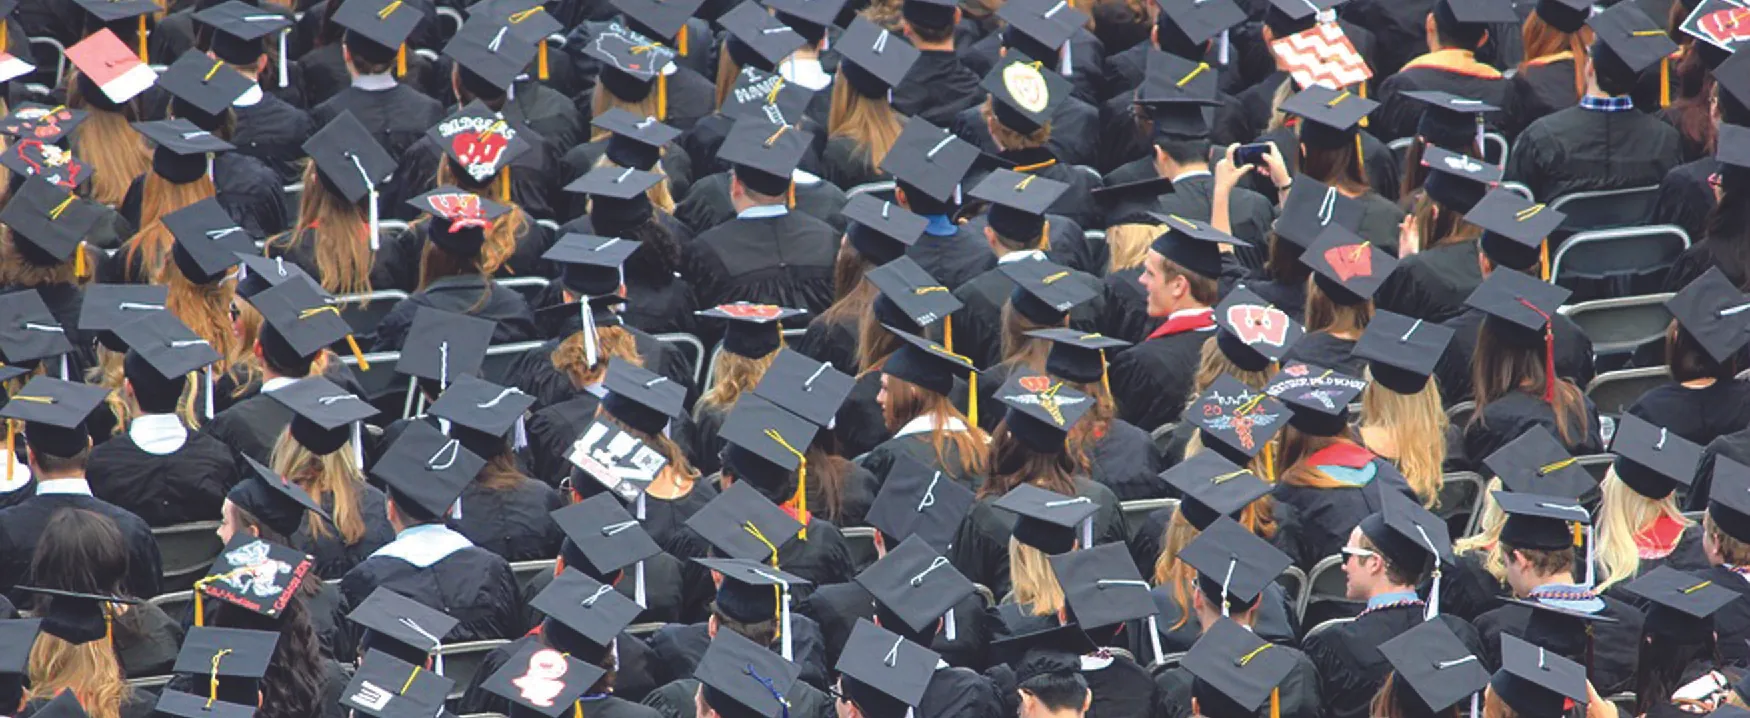 Photo of graduates in caps and gowns.